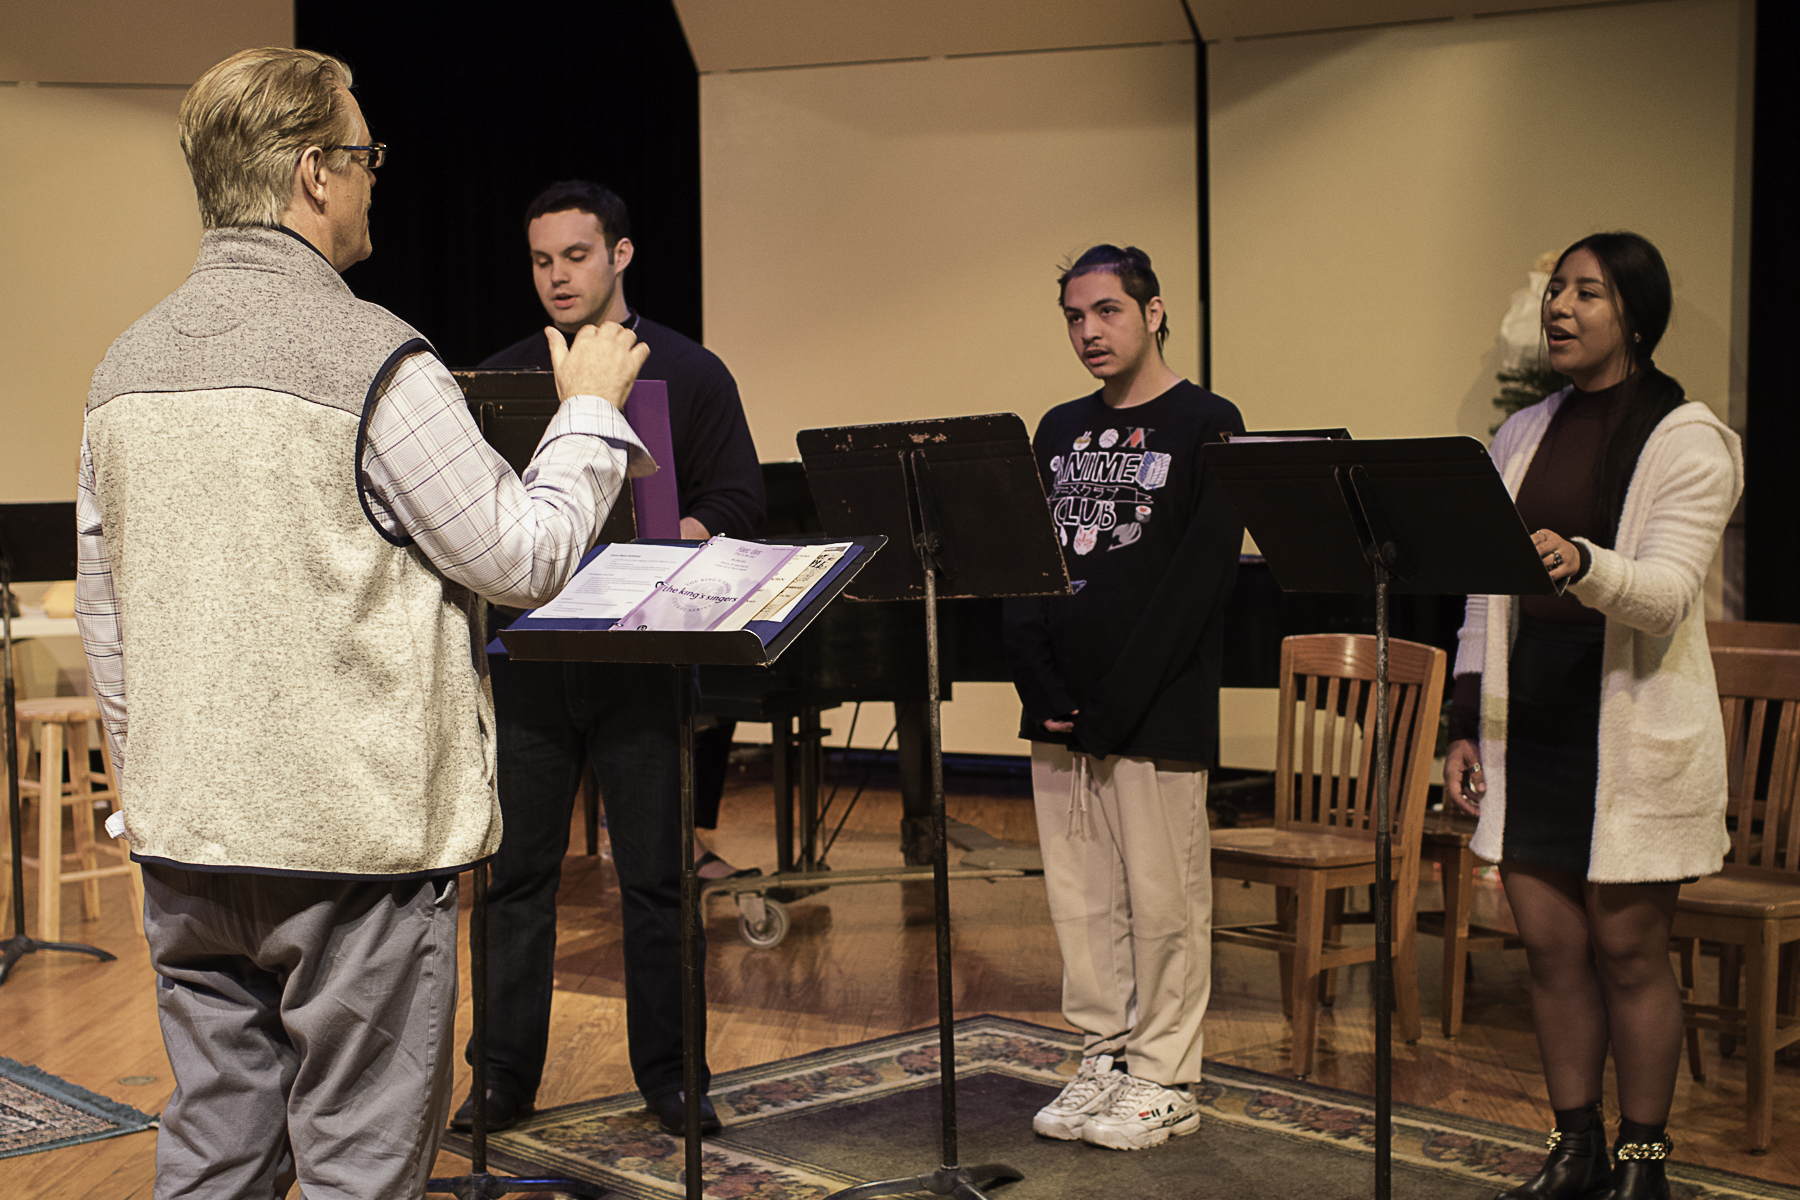 WORLD WAR II RADIO CHRISTMAS - WCJC Drama Department and Choir team up for holiday production